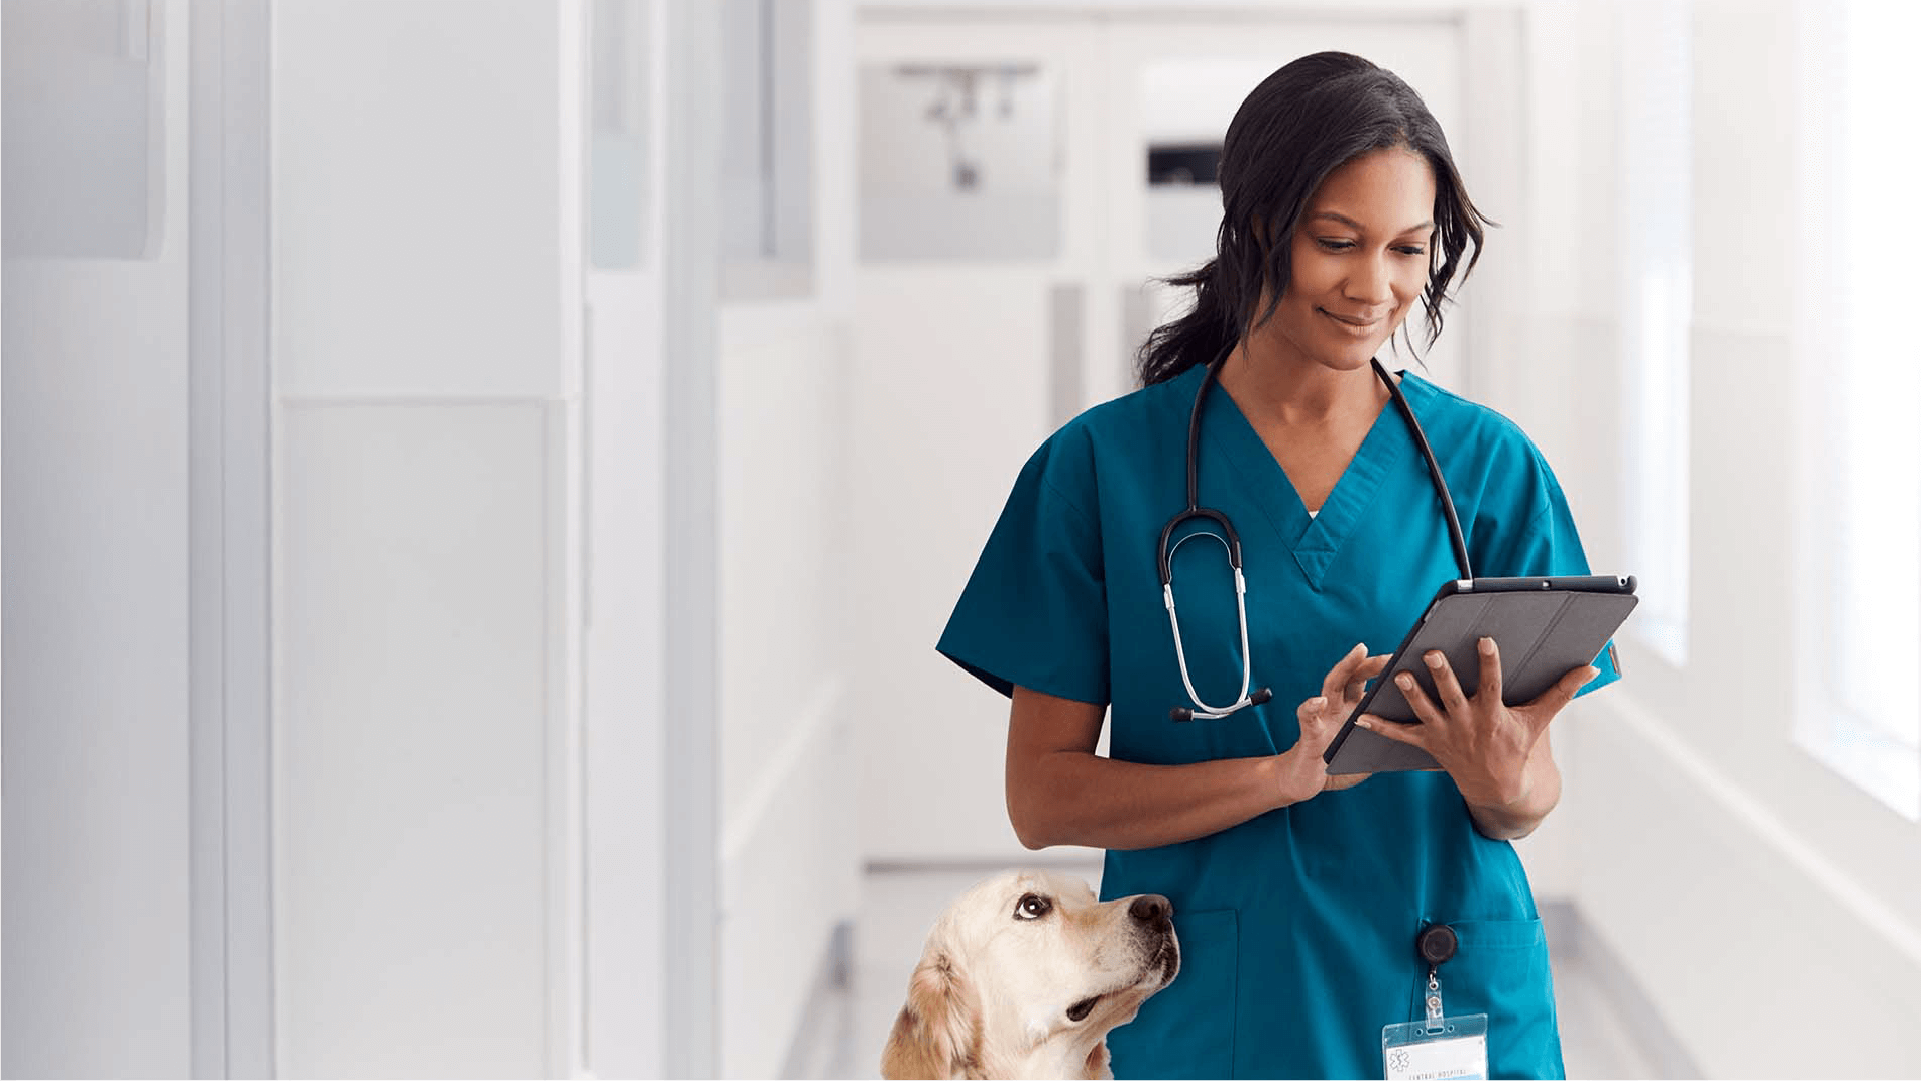 New LifeLearn Survey: 221 Veterinary Practices on Business Growth in 2022